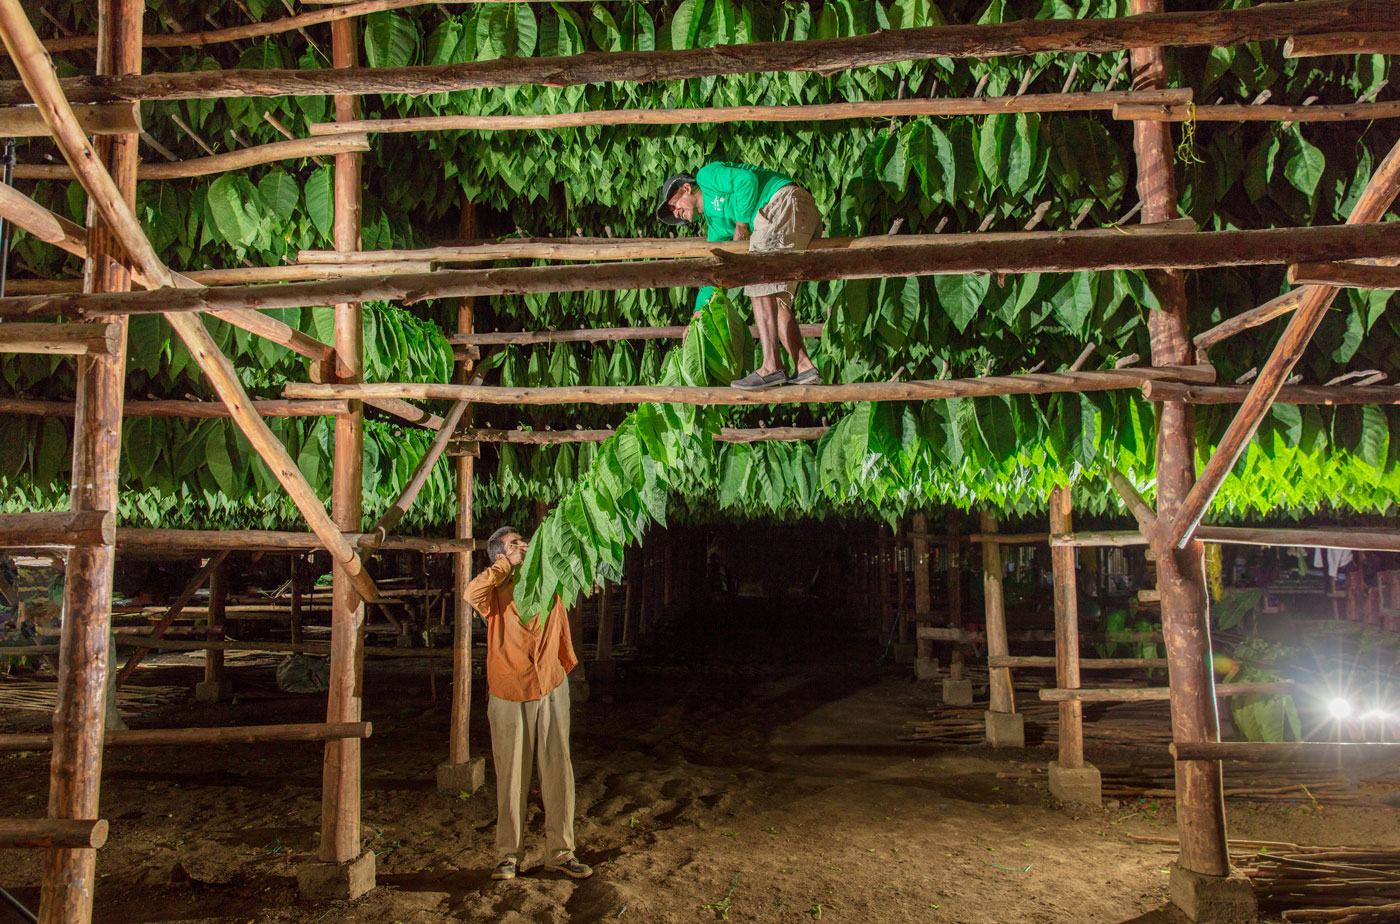 Hanging Tobacco in the Curing Barn